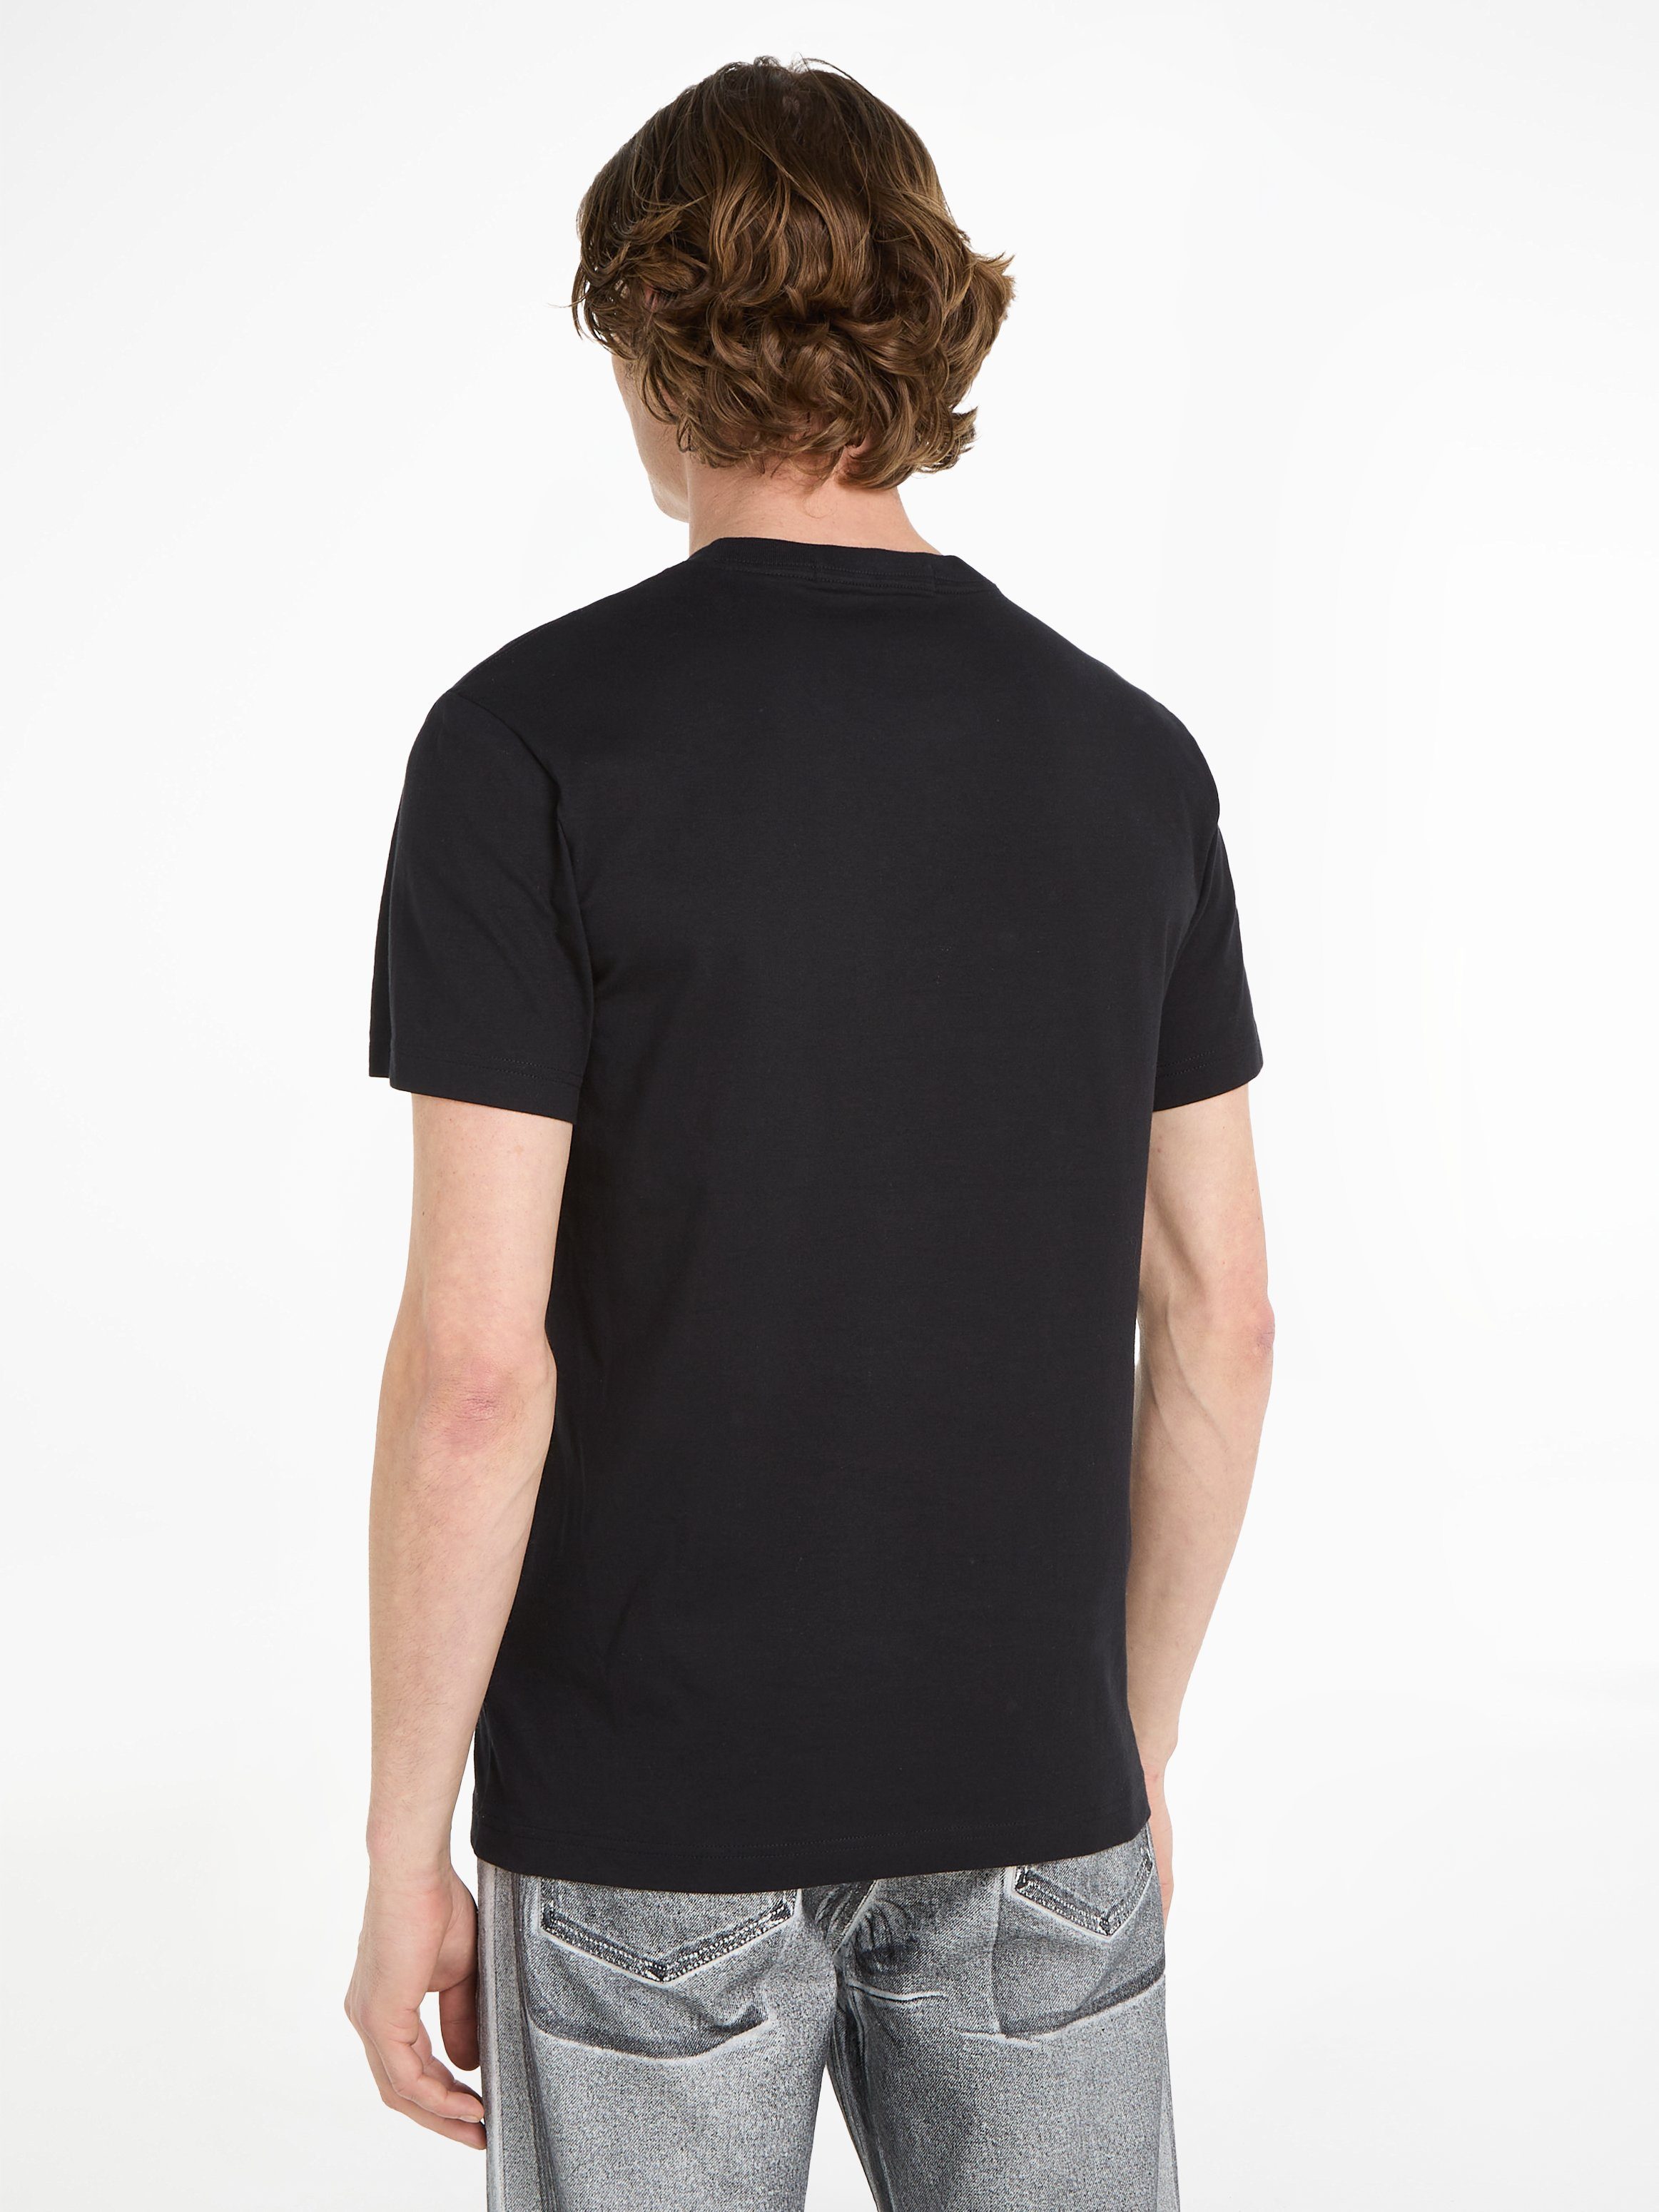 Klein Calvin OUTLINE LOGO STACKED Jeans TEE T-Shirt